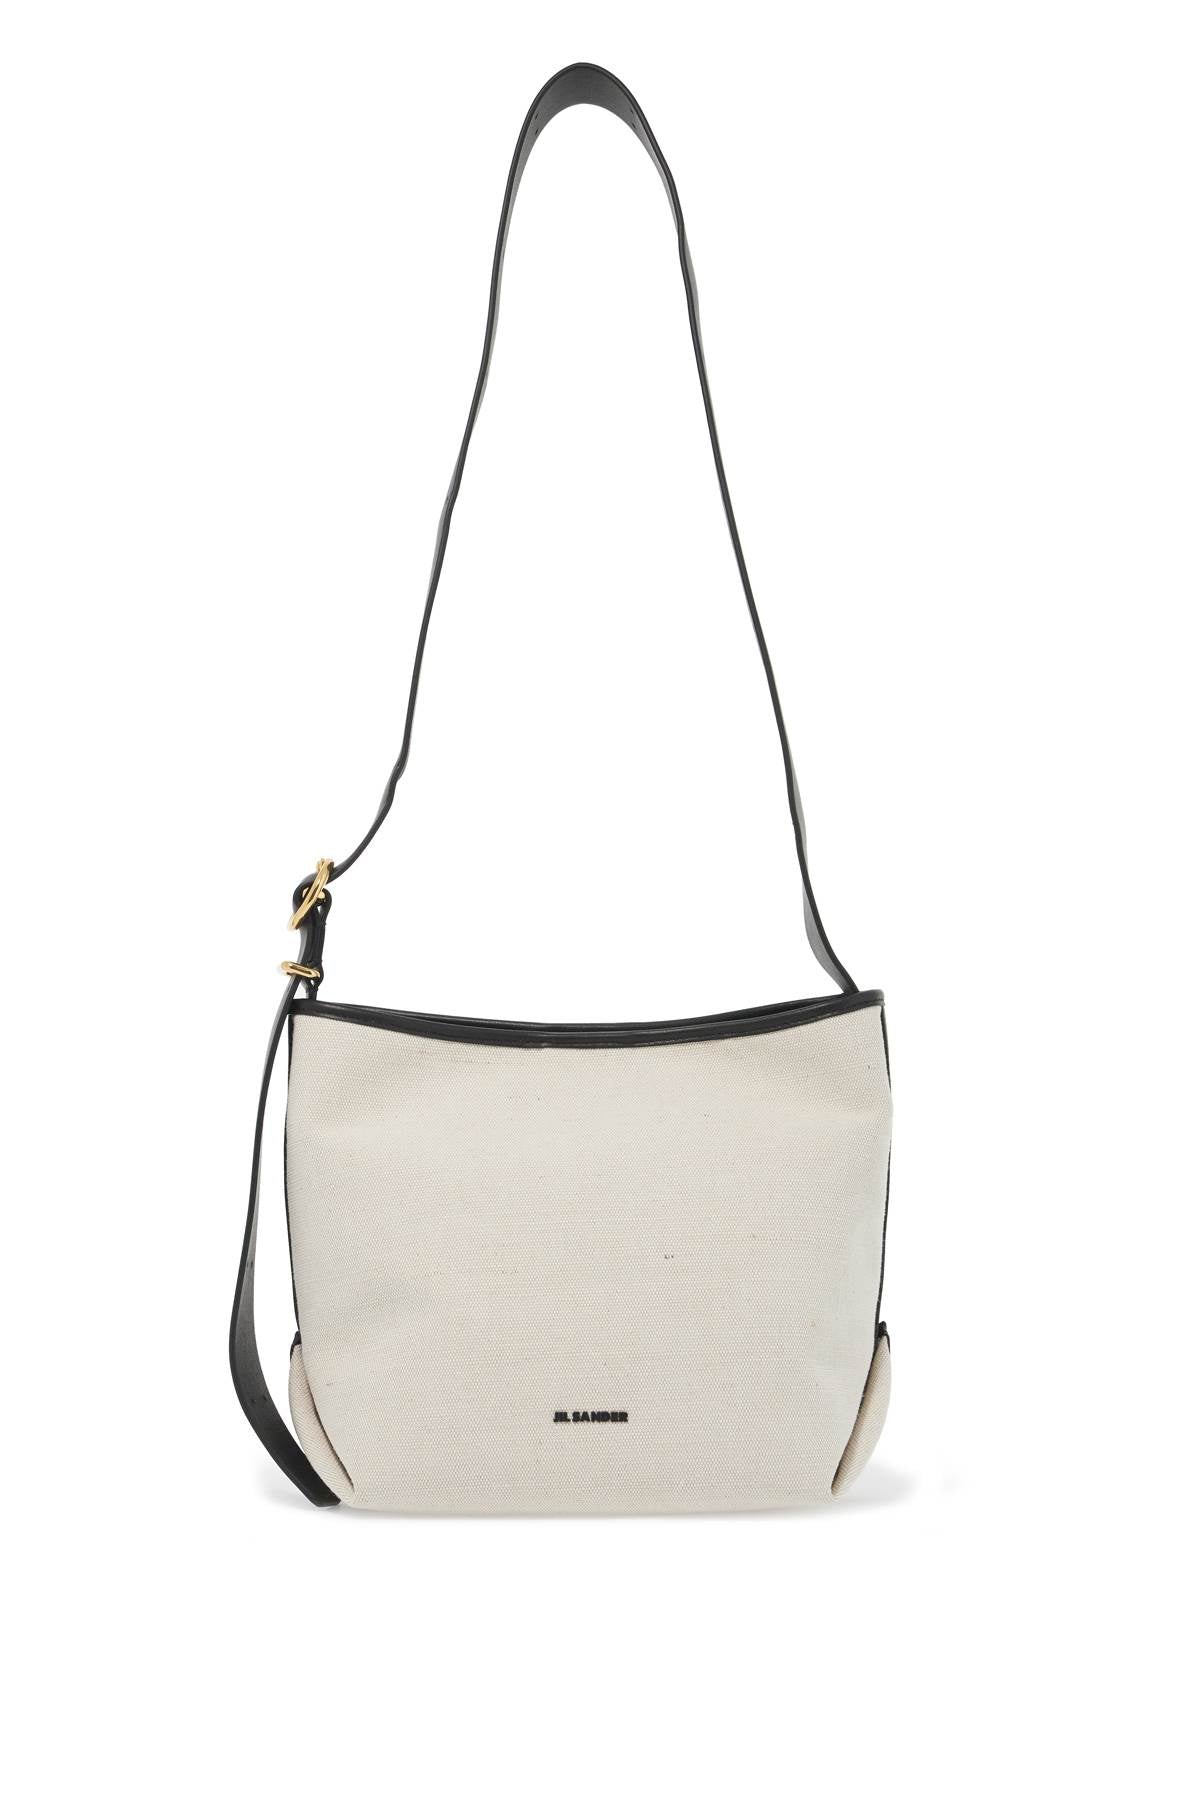 JIL SANDER Small Folded Black Canvas & Leather Tote with Gold Accents and Adjustable Strap